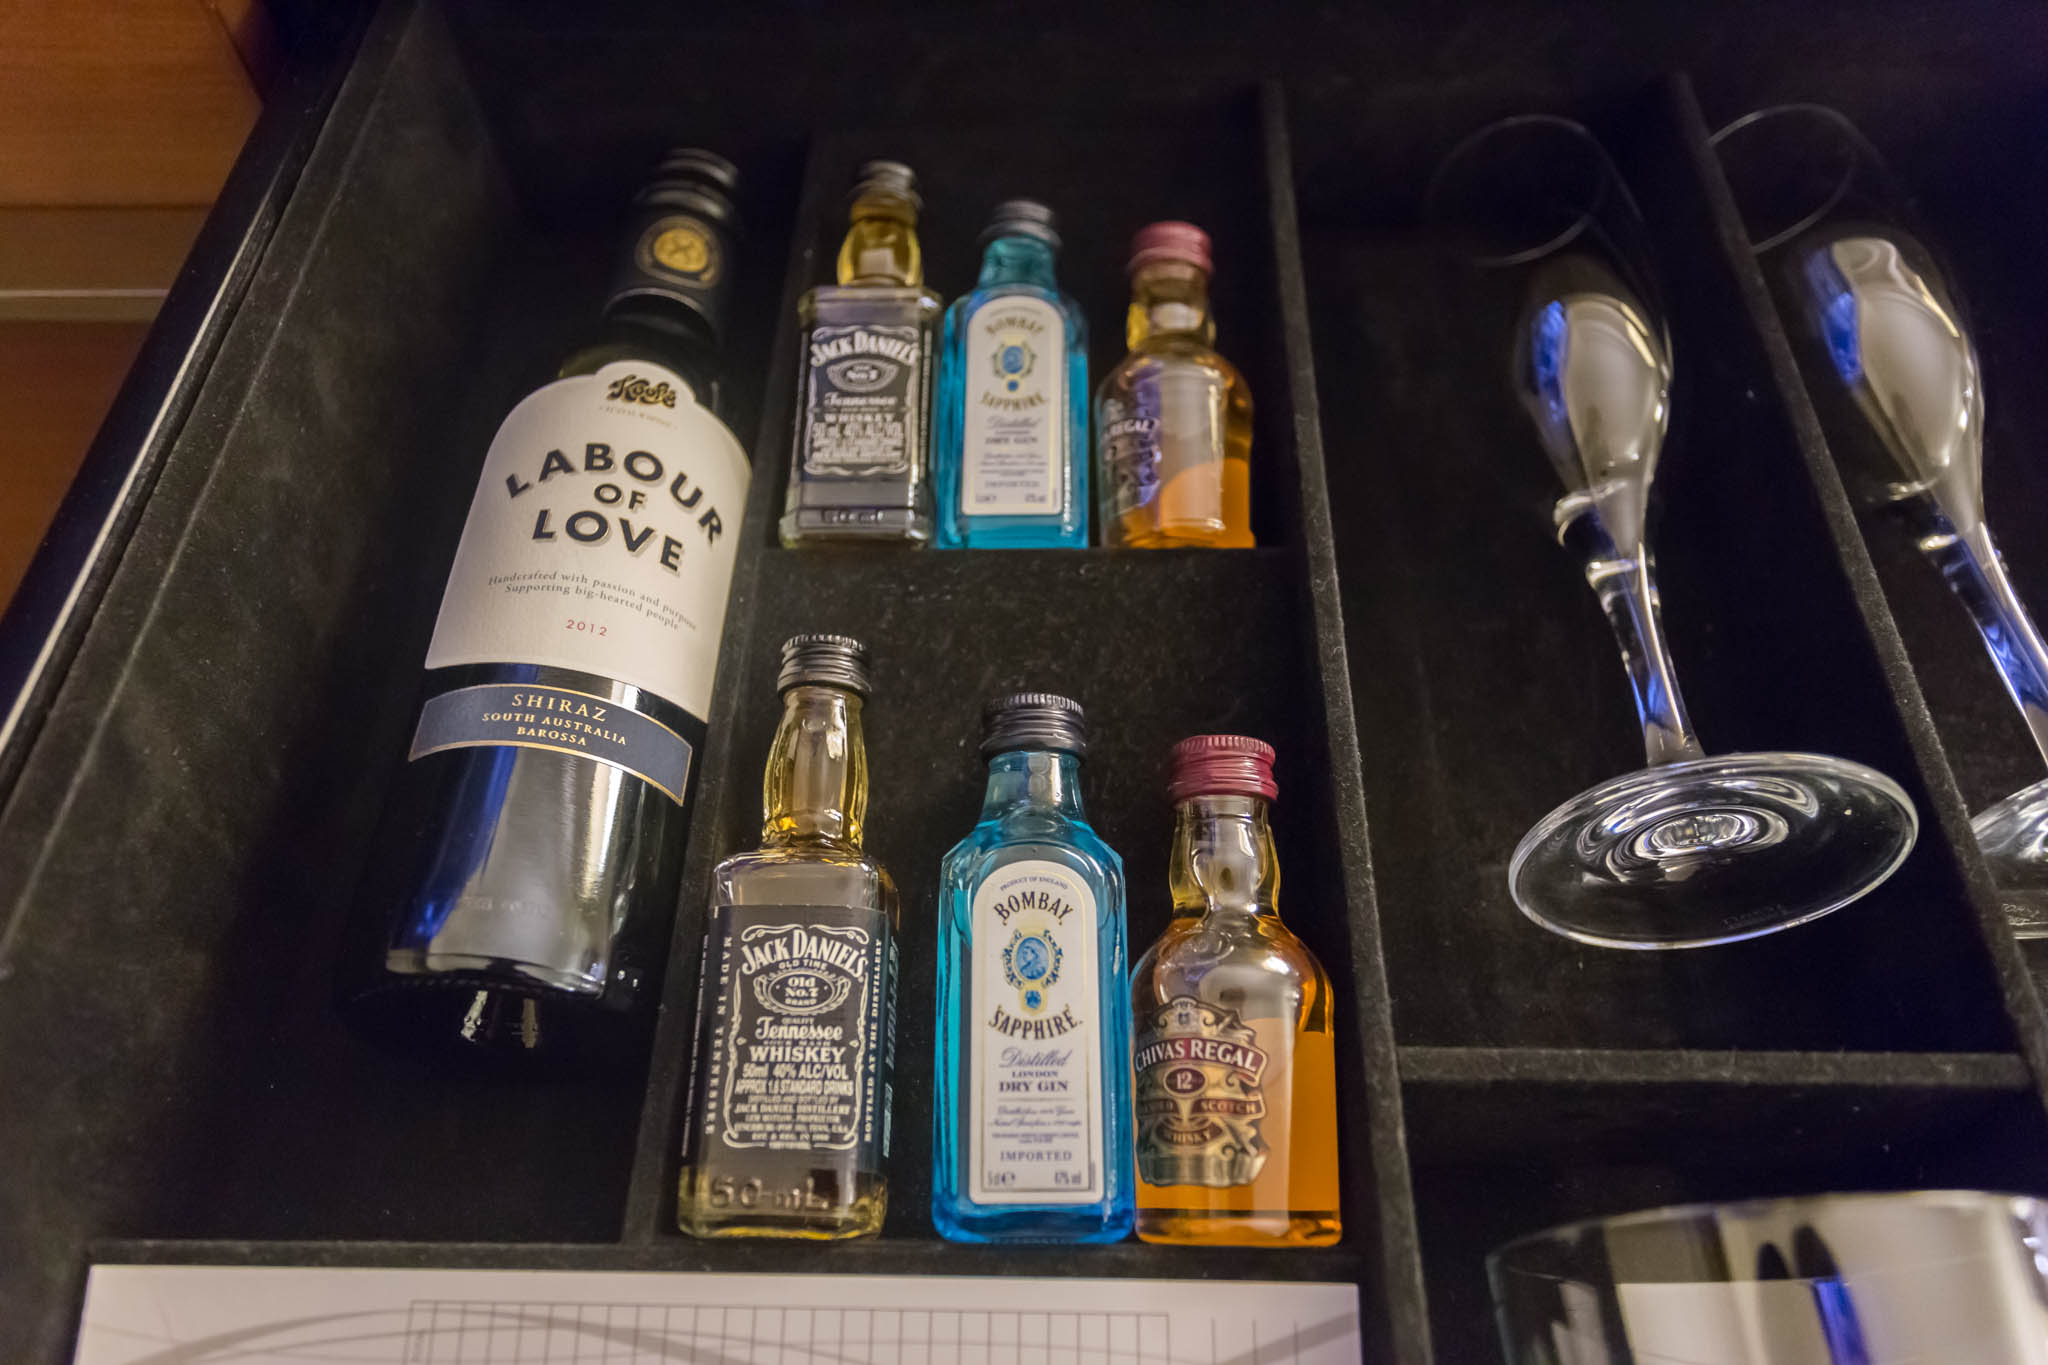 a box with bottles and a glass